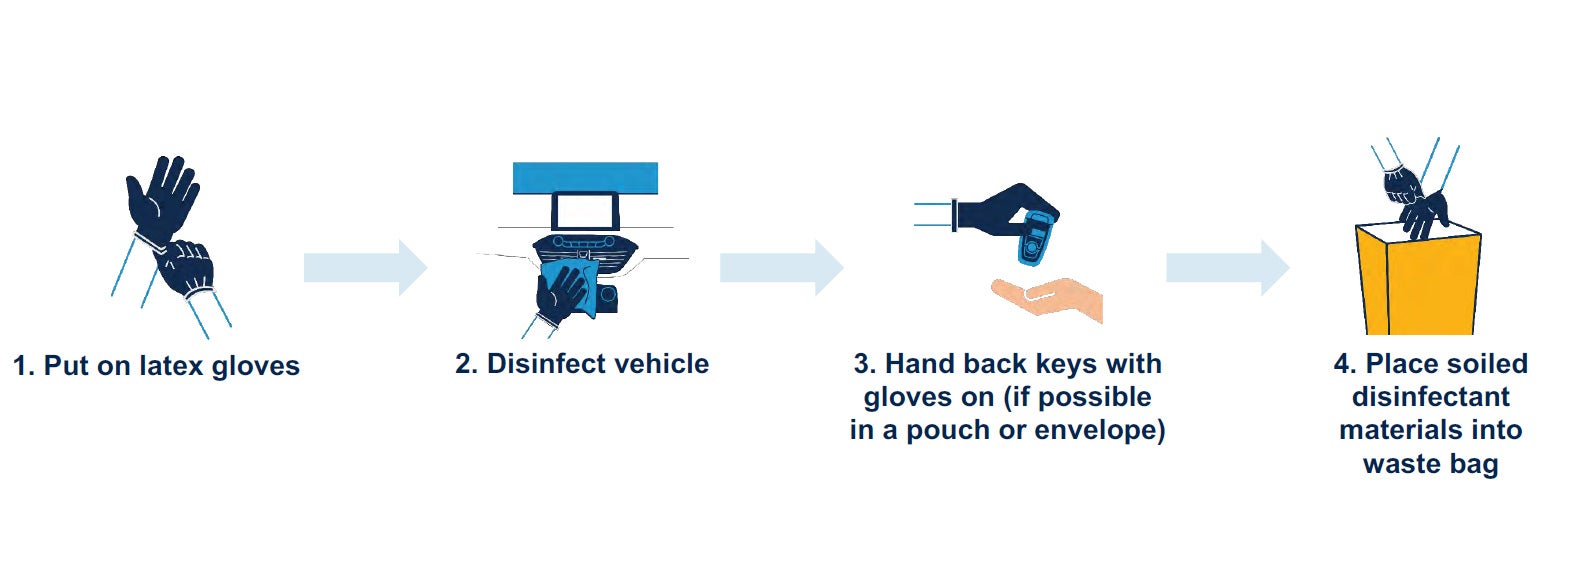 1: Put on latex gloves. 2: Disinfect vehicle. 3: Hand back keys with gloves on (if possible in a pouch or envelope. 4: Place soiled disinfectant materials into waste bag.